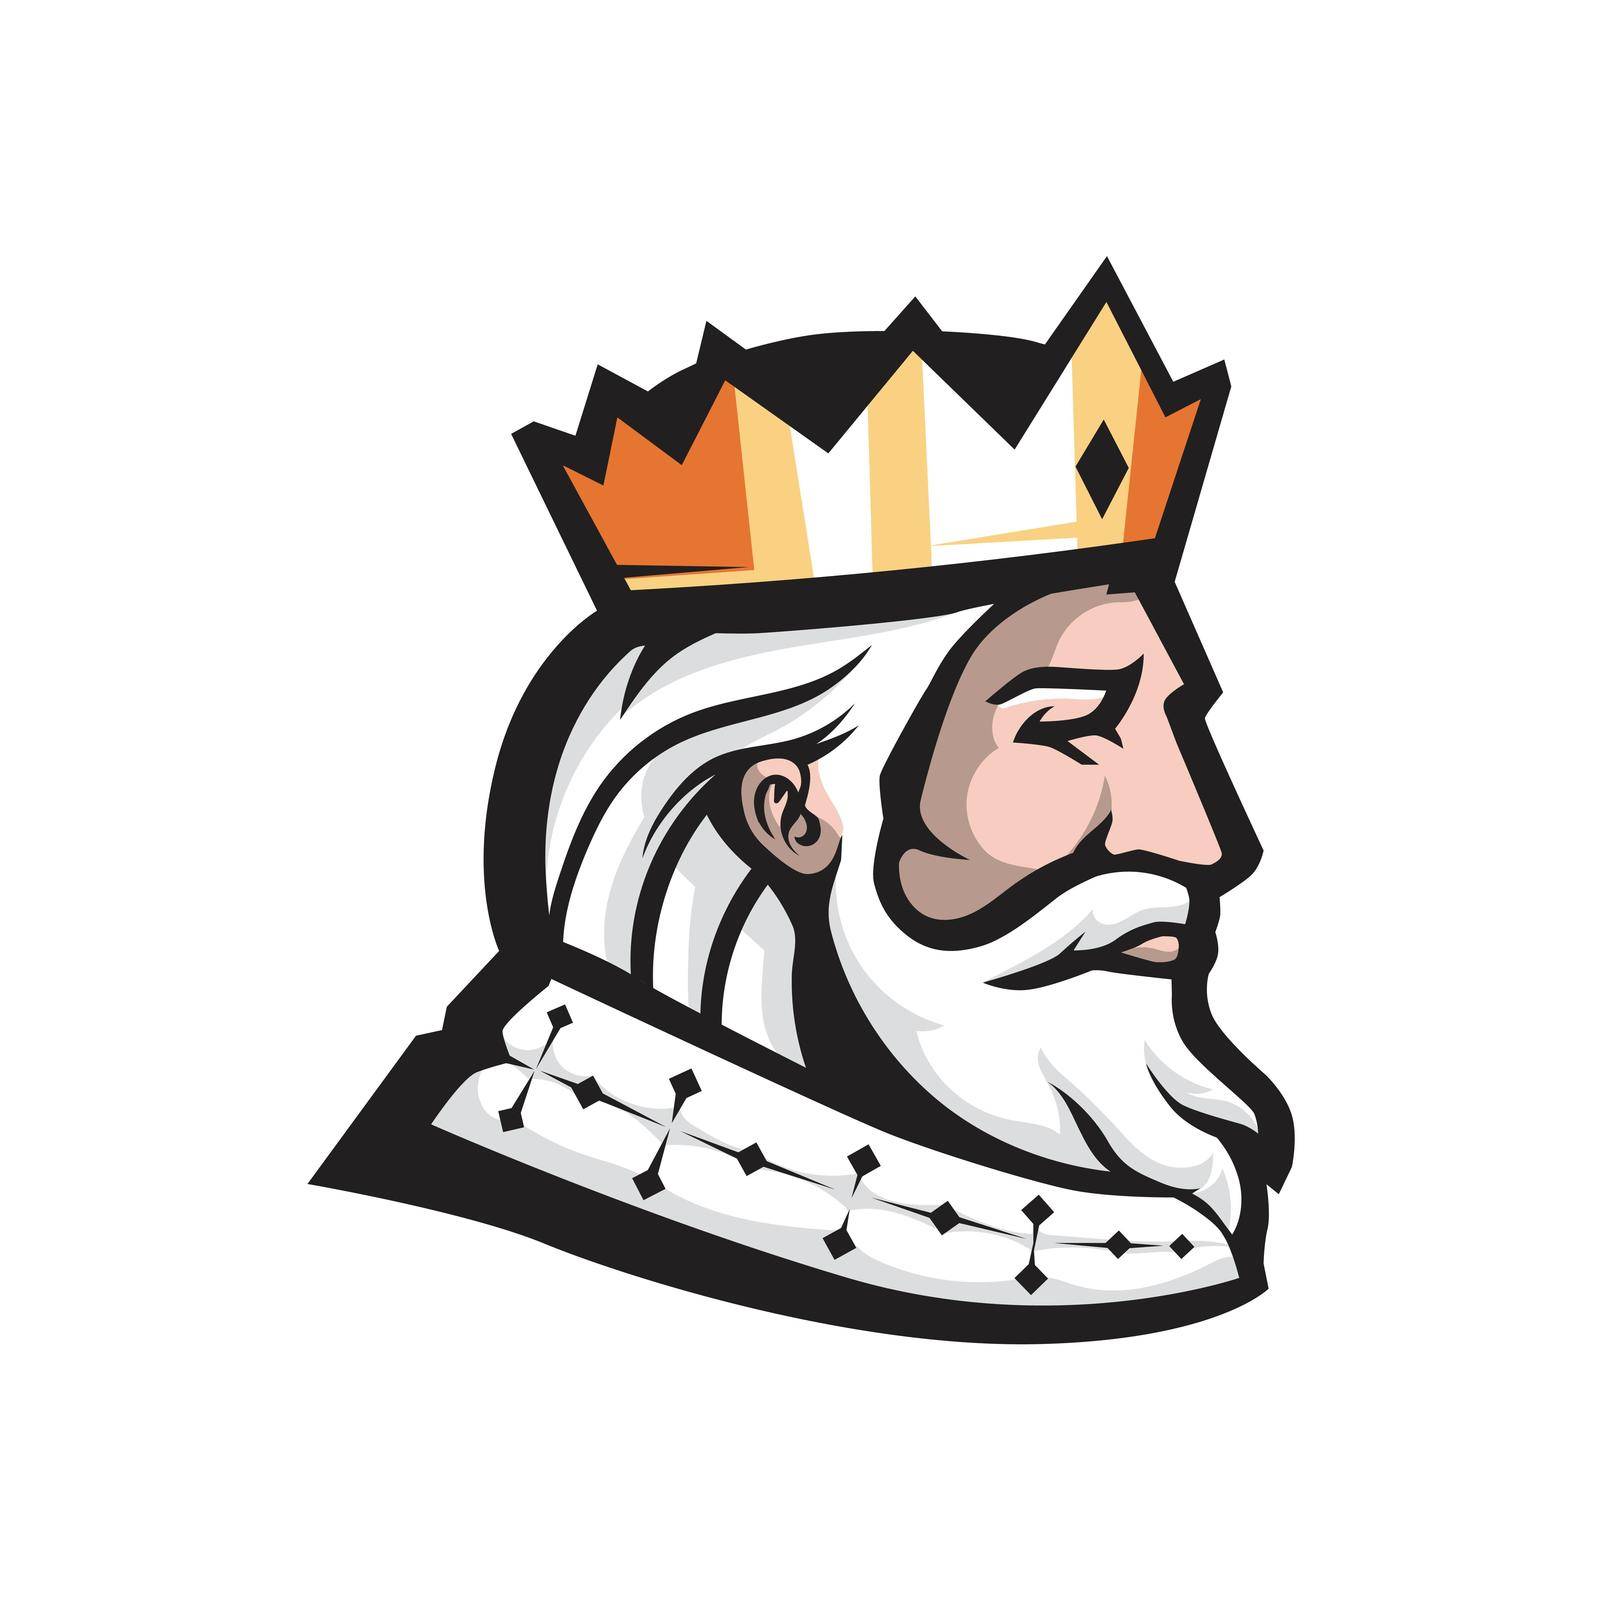 wise King Head Mascot for Sport or Esports vector illustration